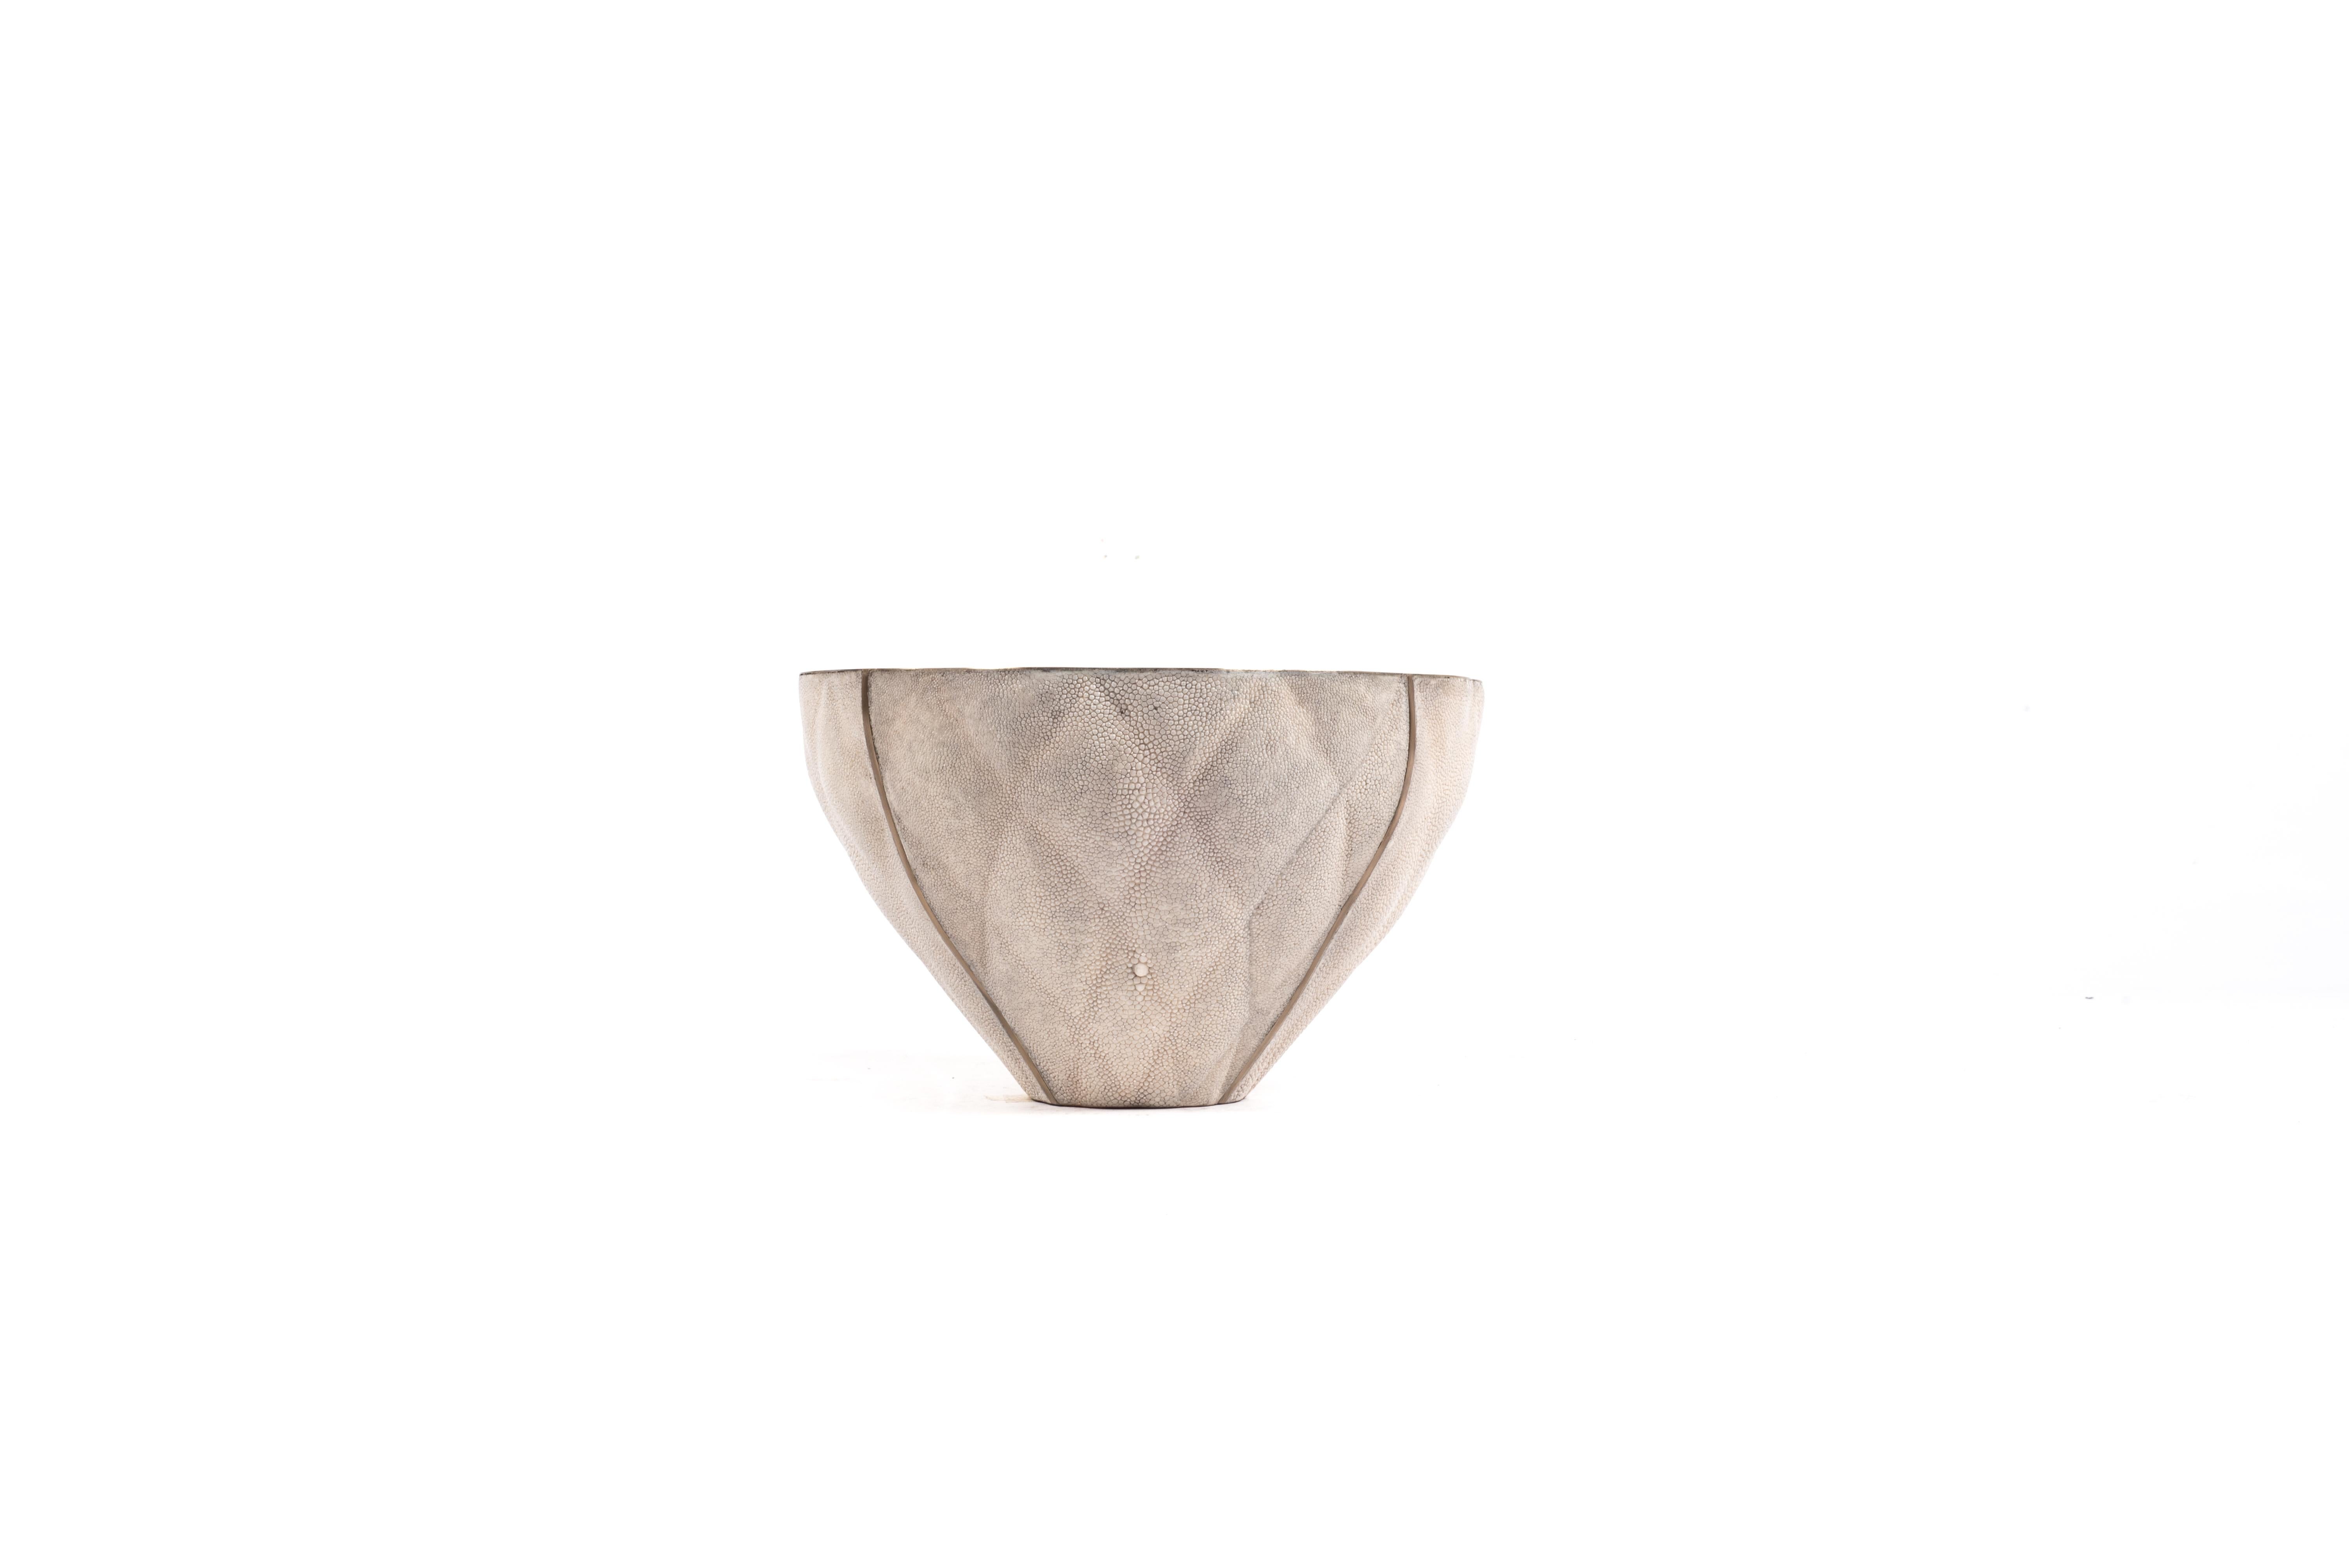 The Coco bowl is a sophisticated and luxurious accent piece with its exquisite quilted details. The exterior is inlaid in cream shagreen and the interior in bronze-patina brass. This listing is for the medium size, available in a small size and